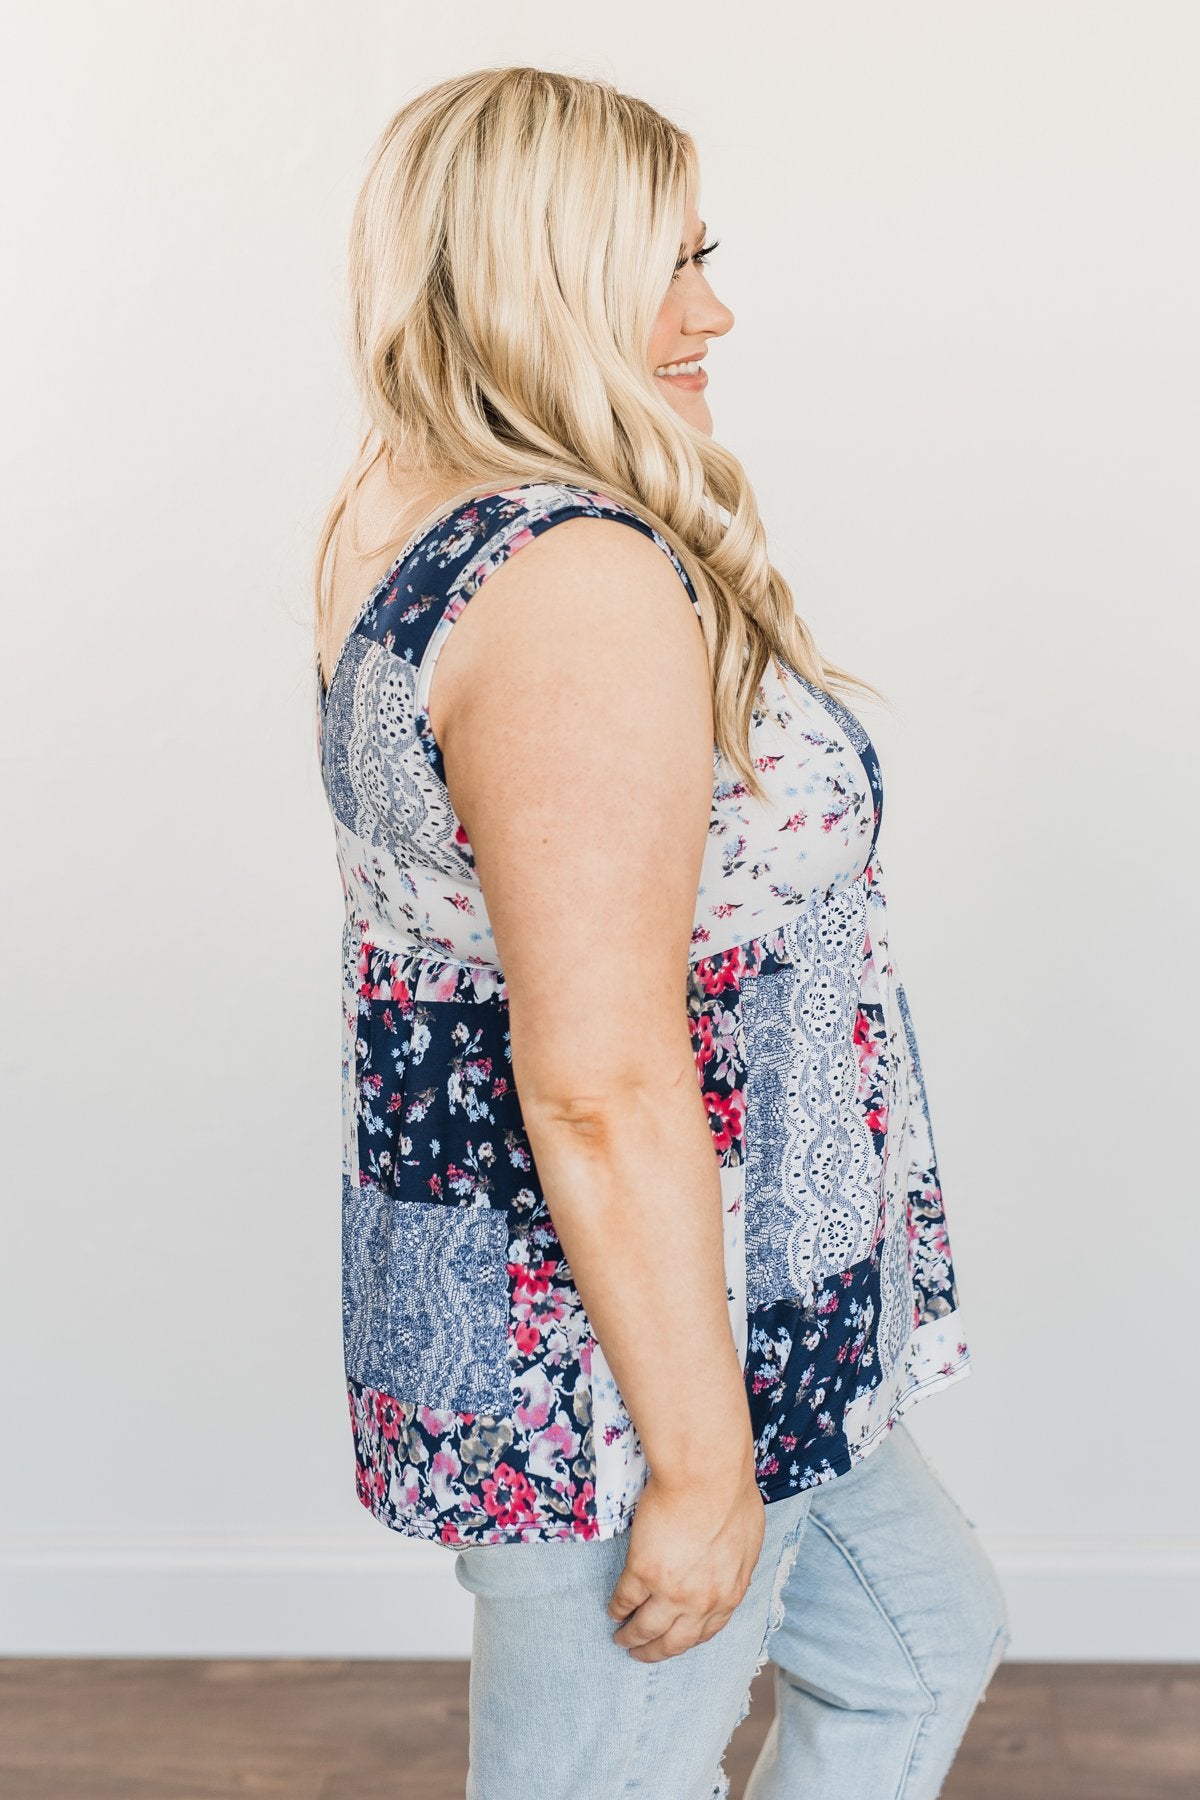 A Moment To Treasure Floral Tank Top- Navy & Ivory